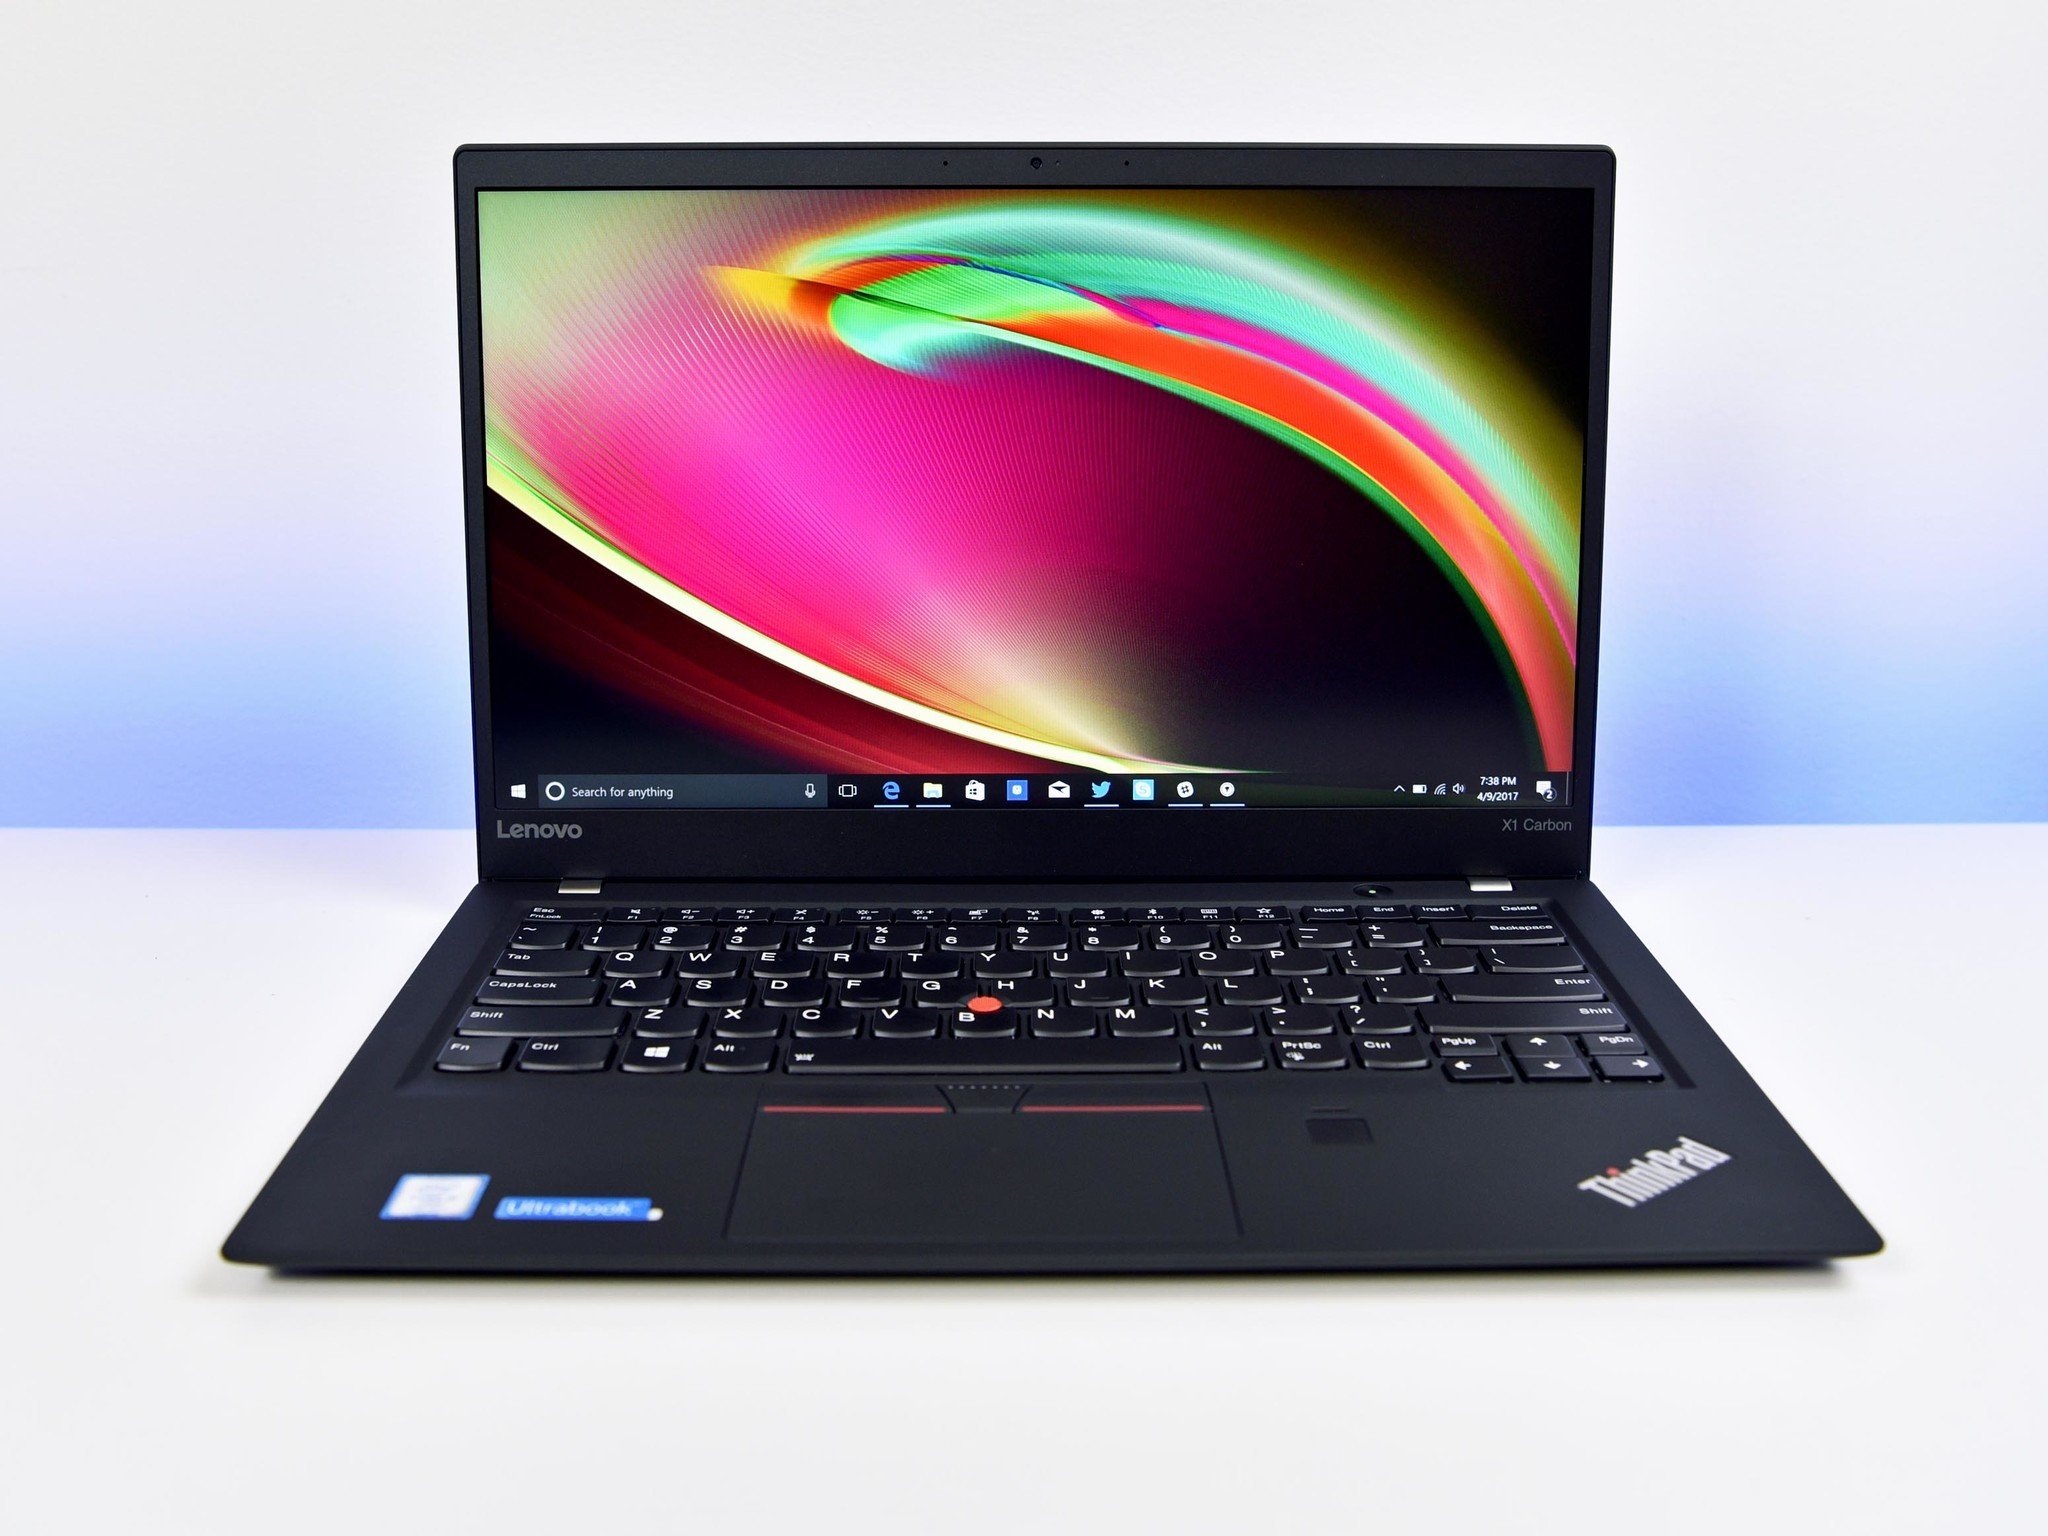 Lenovo ThinkPad X1 Carbon (2017) review: An iconic business laptop